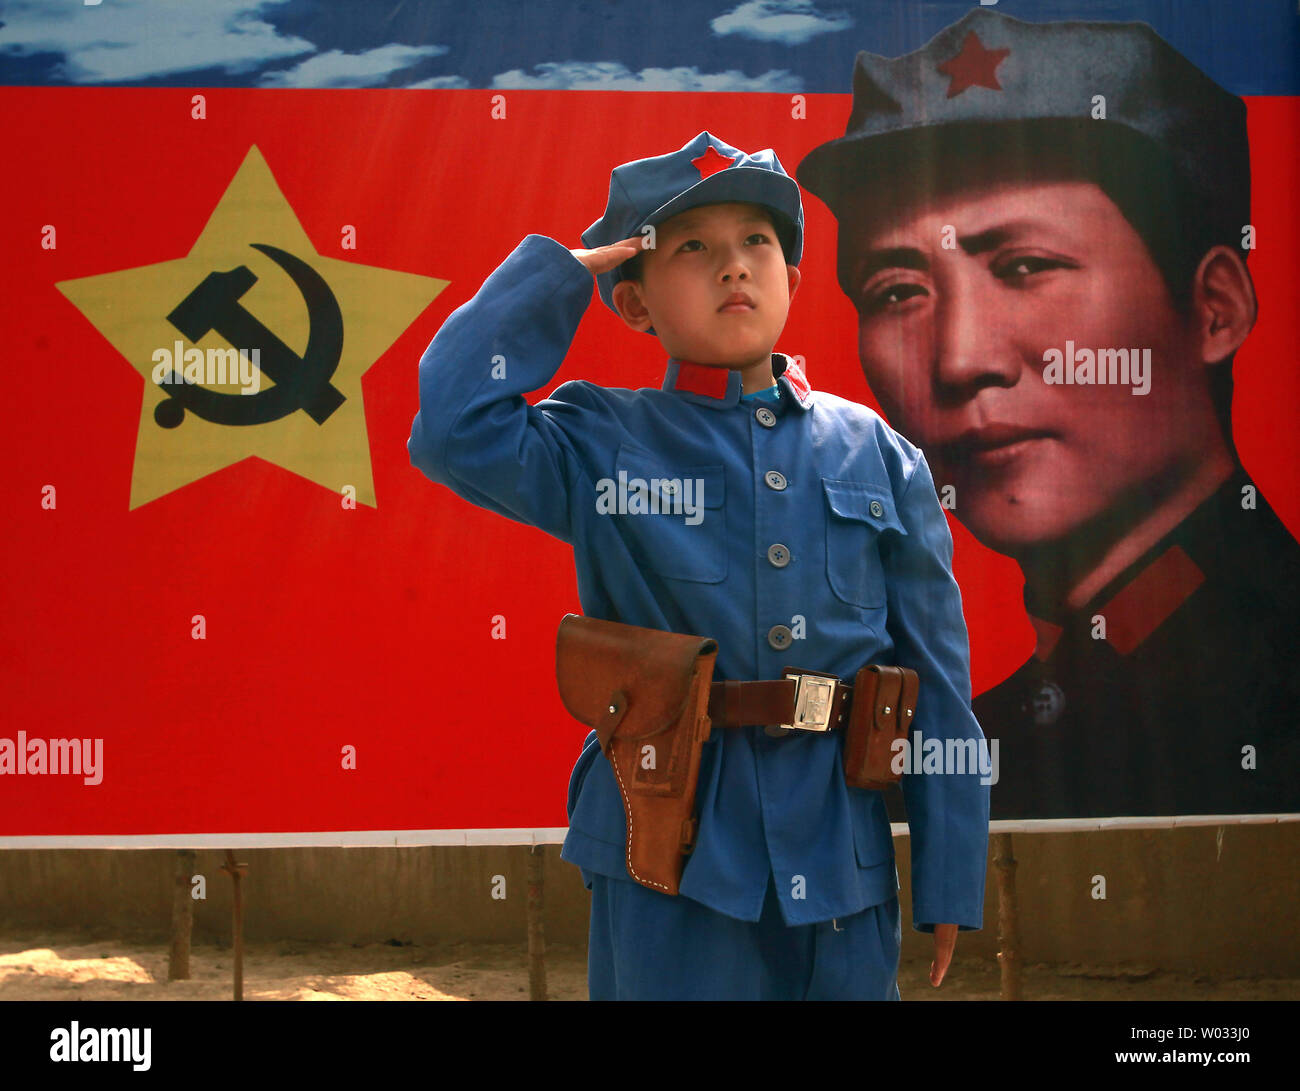 A Chinese boy dressed in a communist uniform poses for a photo, in front of  a banner of the communist party's ideal soldier Li Feng, at a site used by  former helmsman